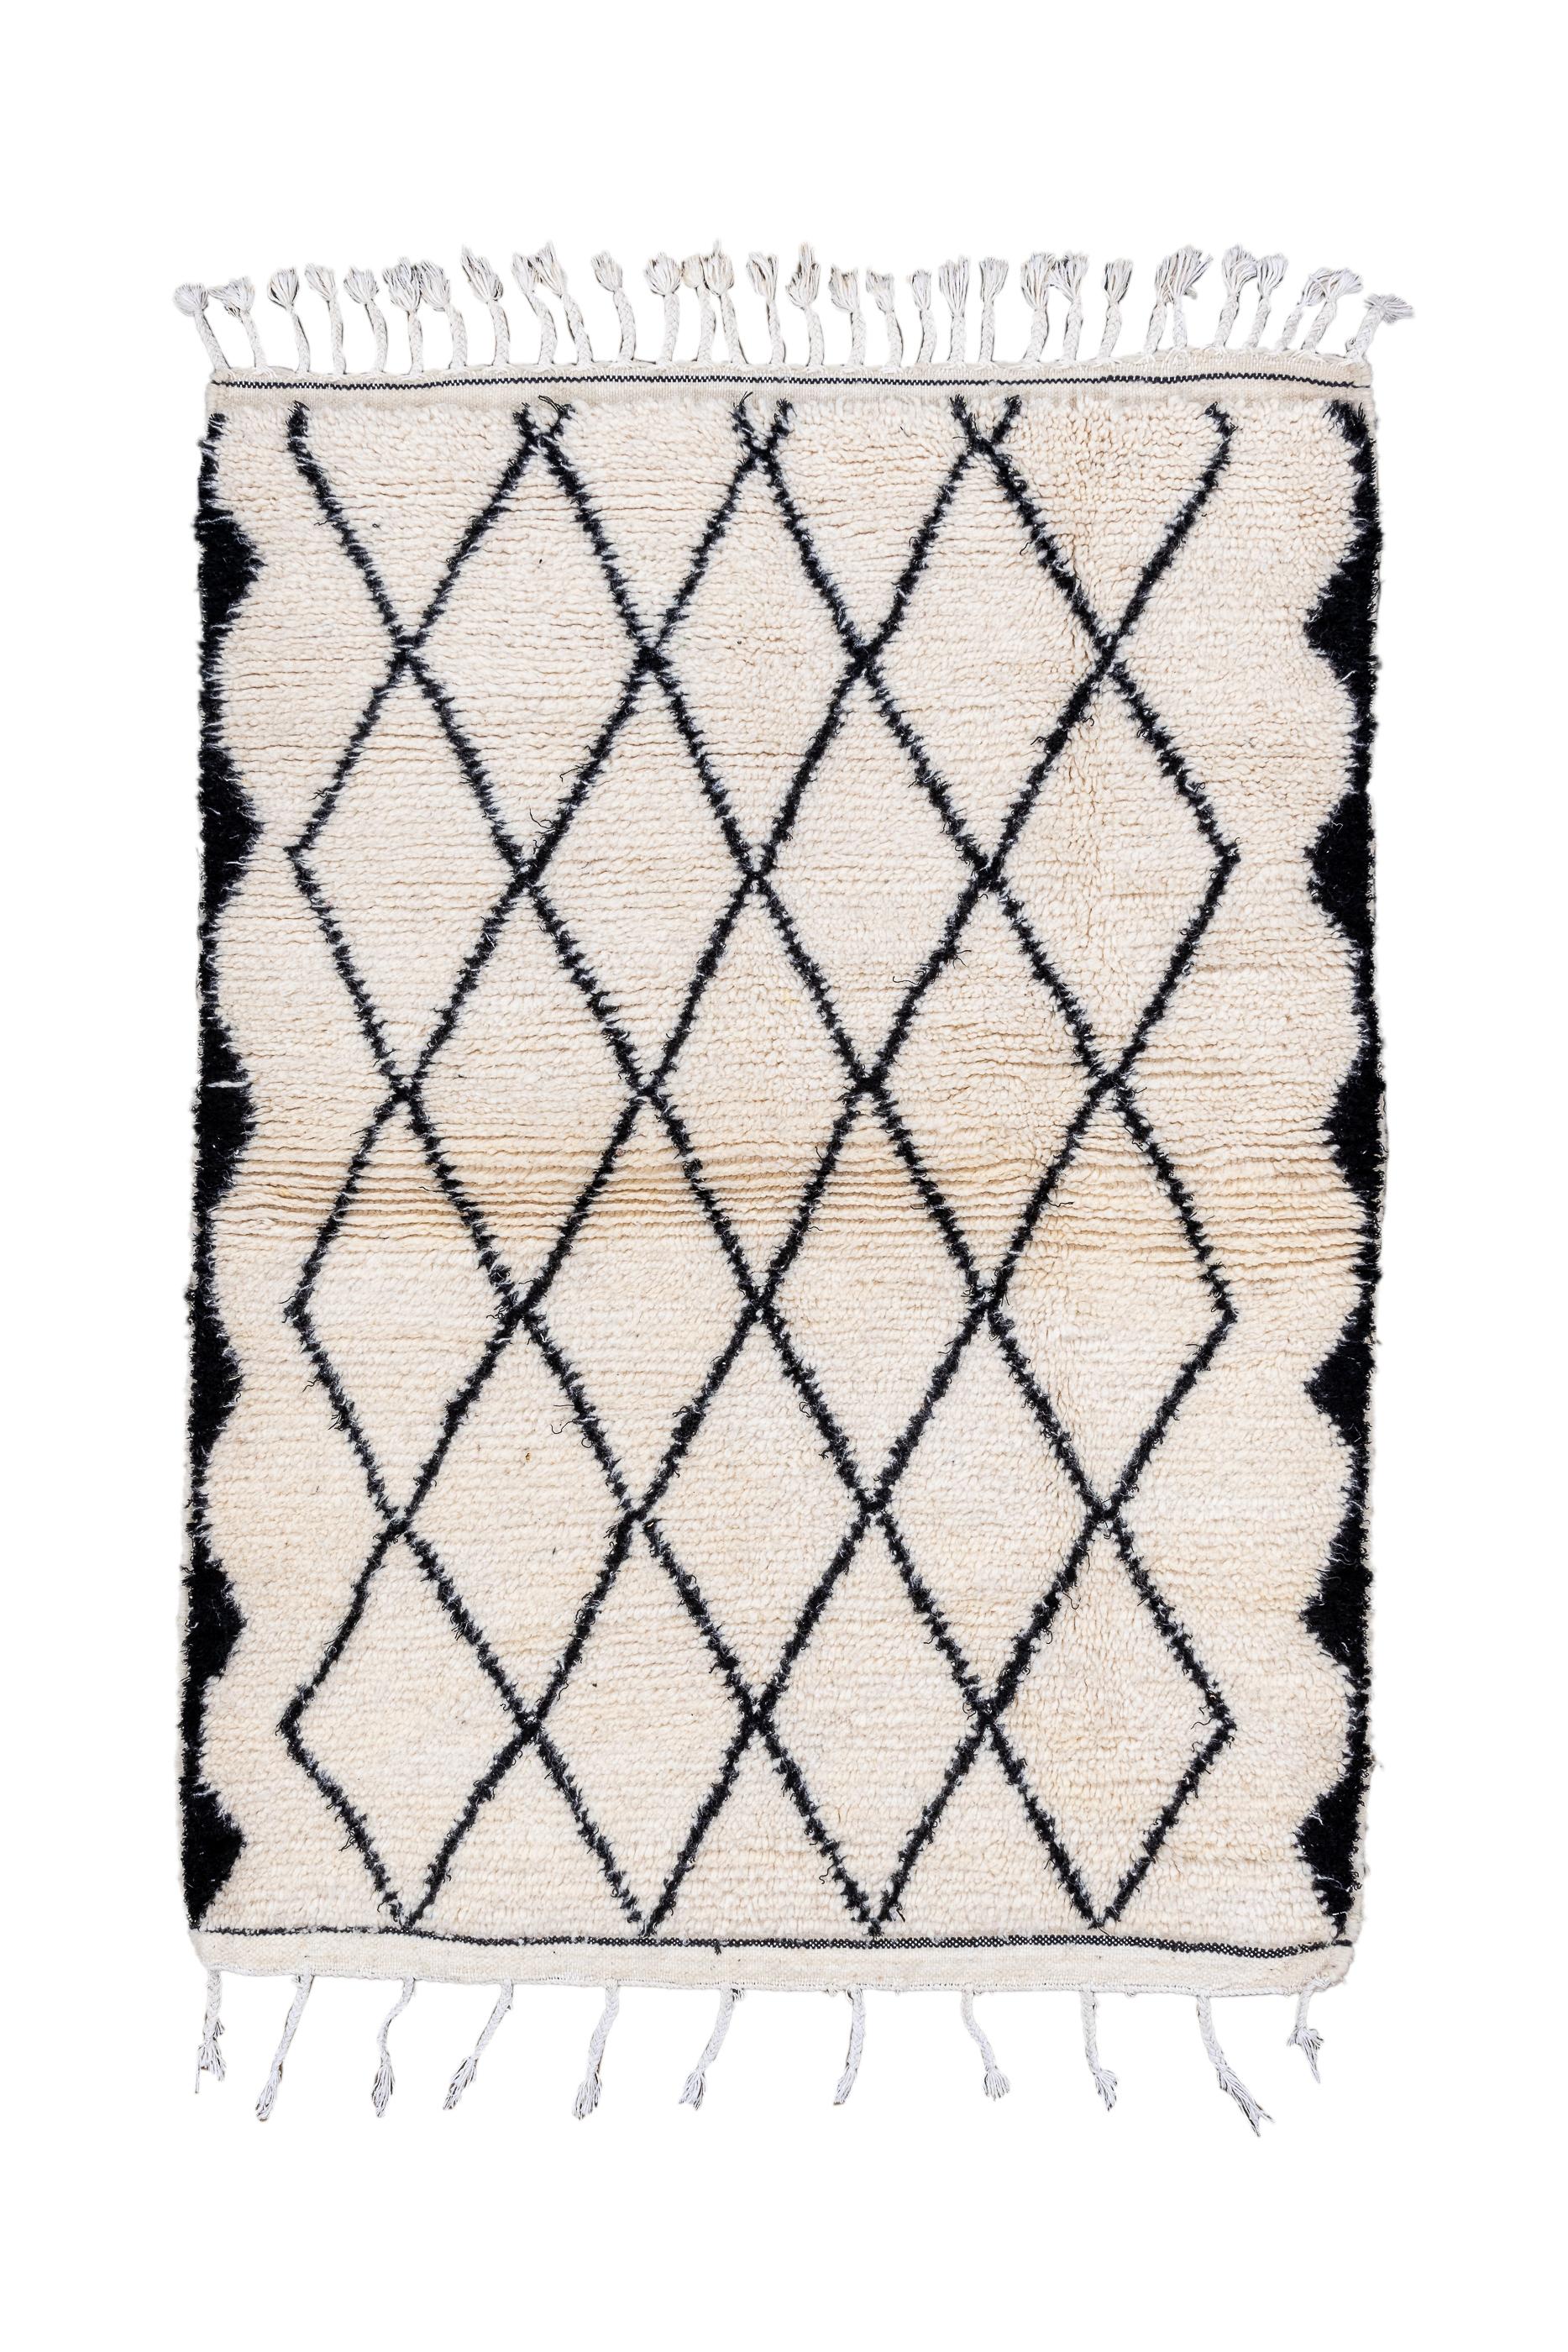 Almost a monochrome, with a minimal open pole medallion of three charcoal diamonds spaciously set on an off-white natural borderless field. Flatweave finish at one end, tassels at the other. Coarse weave with a long and fleecy pile. As new